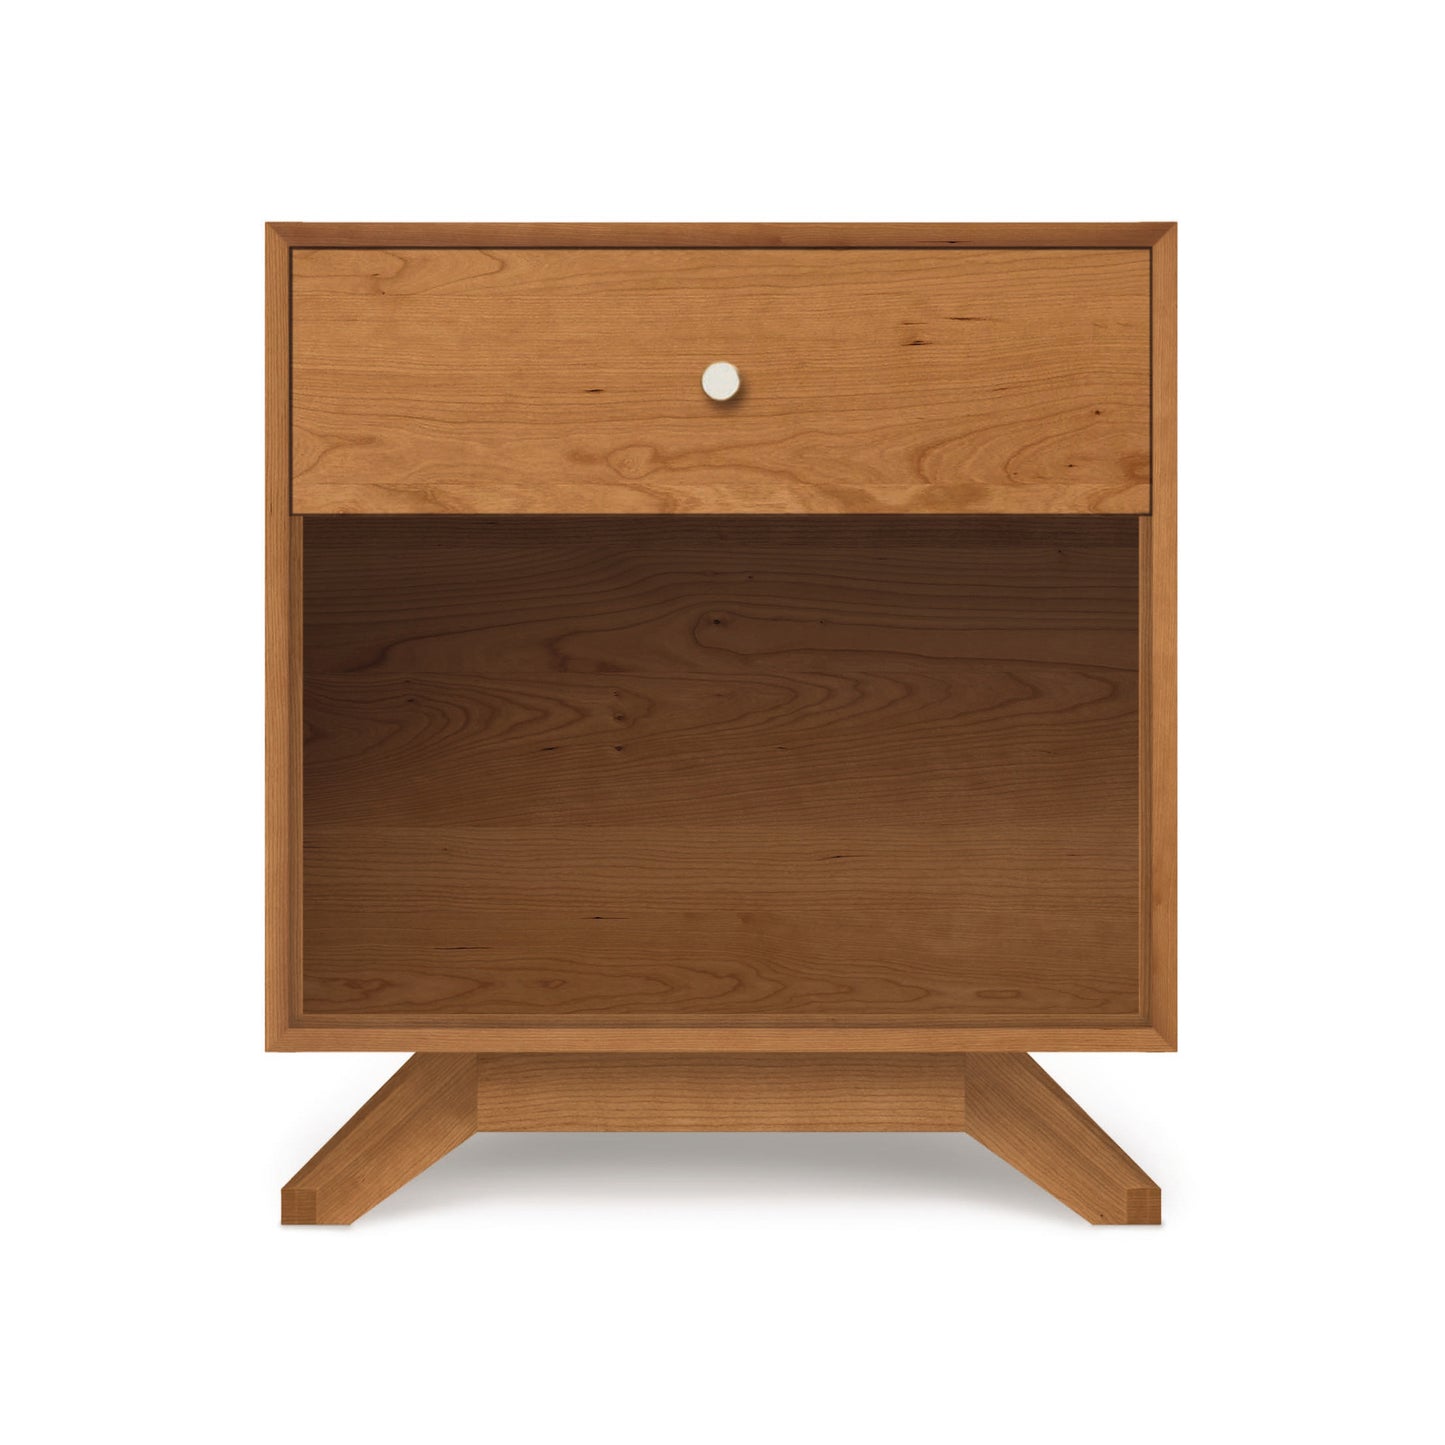 The Astrid 1-Drawer Enclosed Shelf Nightstand is a handcrafted piece of contemporary furniture made in Vermont by Copeland Furniture.